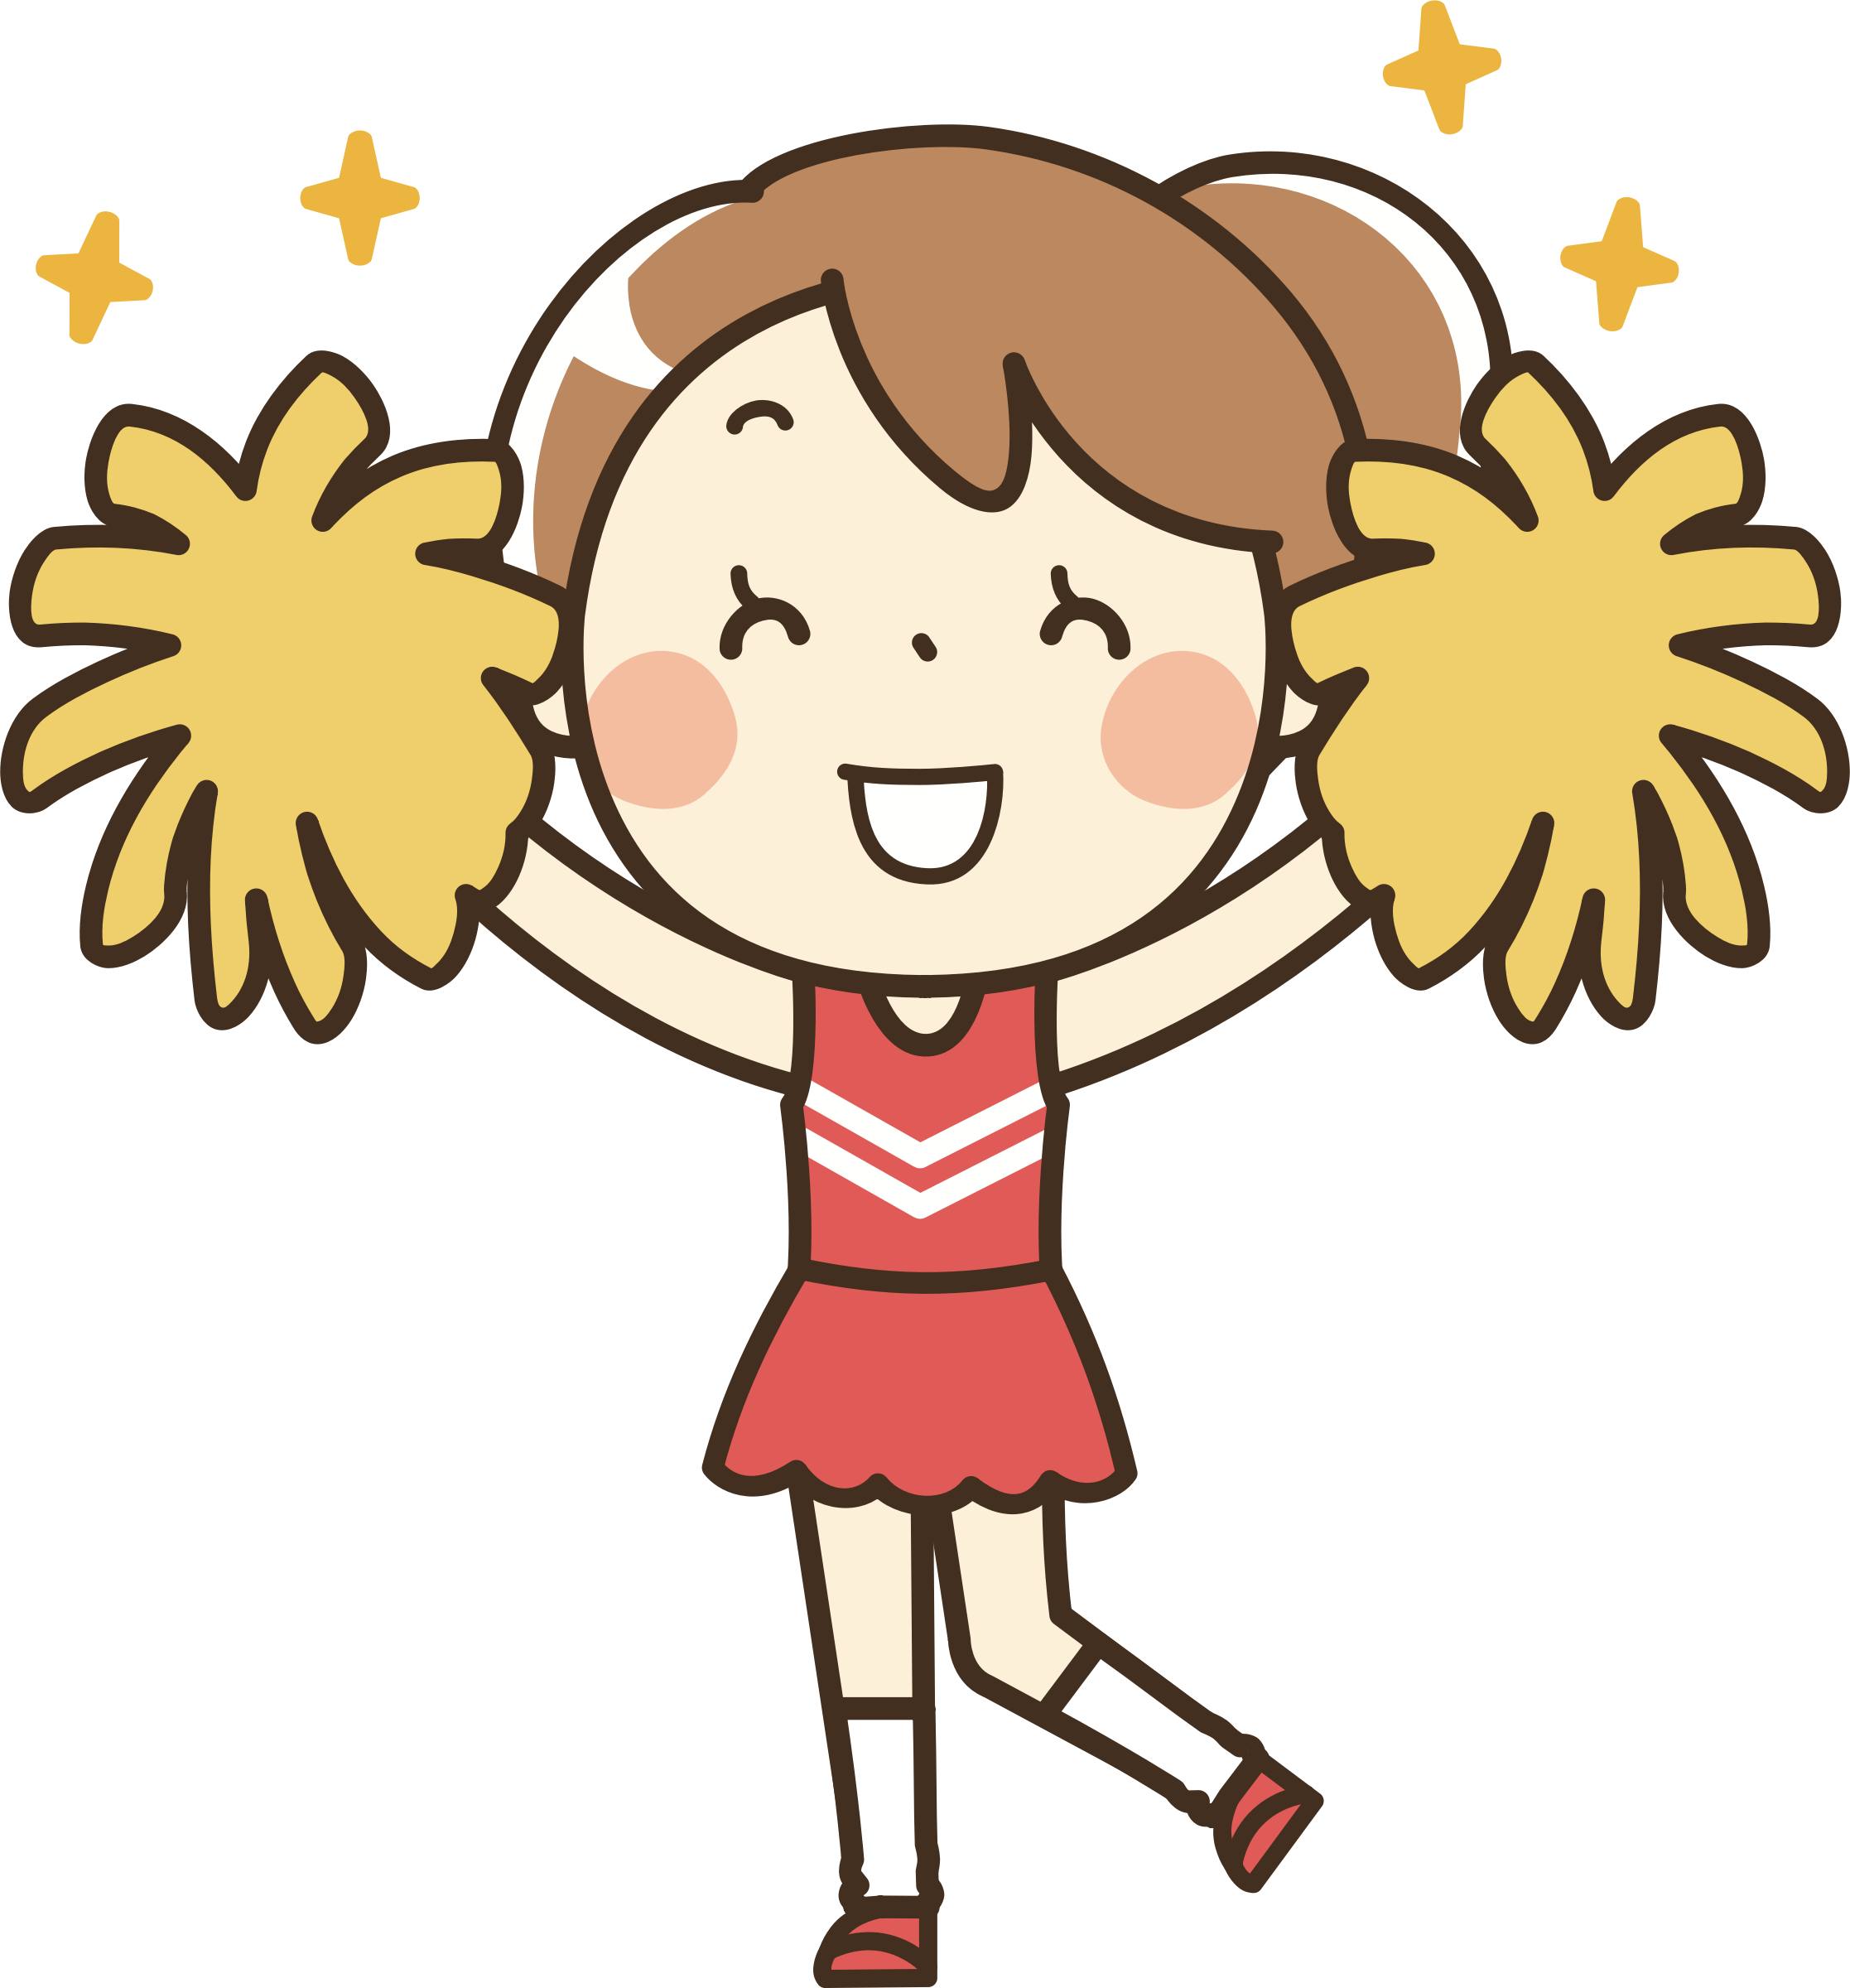 Clip Arts Related To : clip art of a cheerleader. 